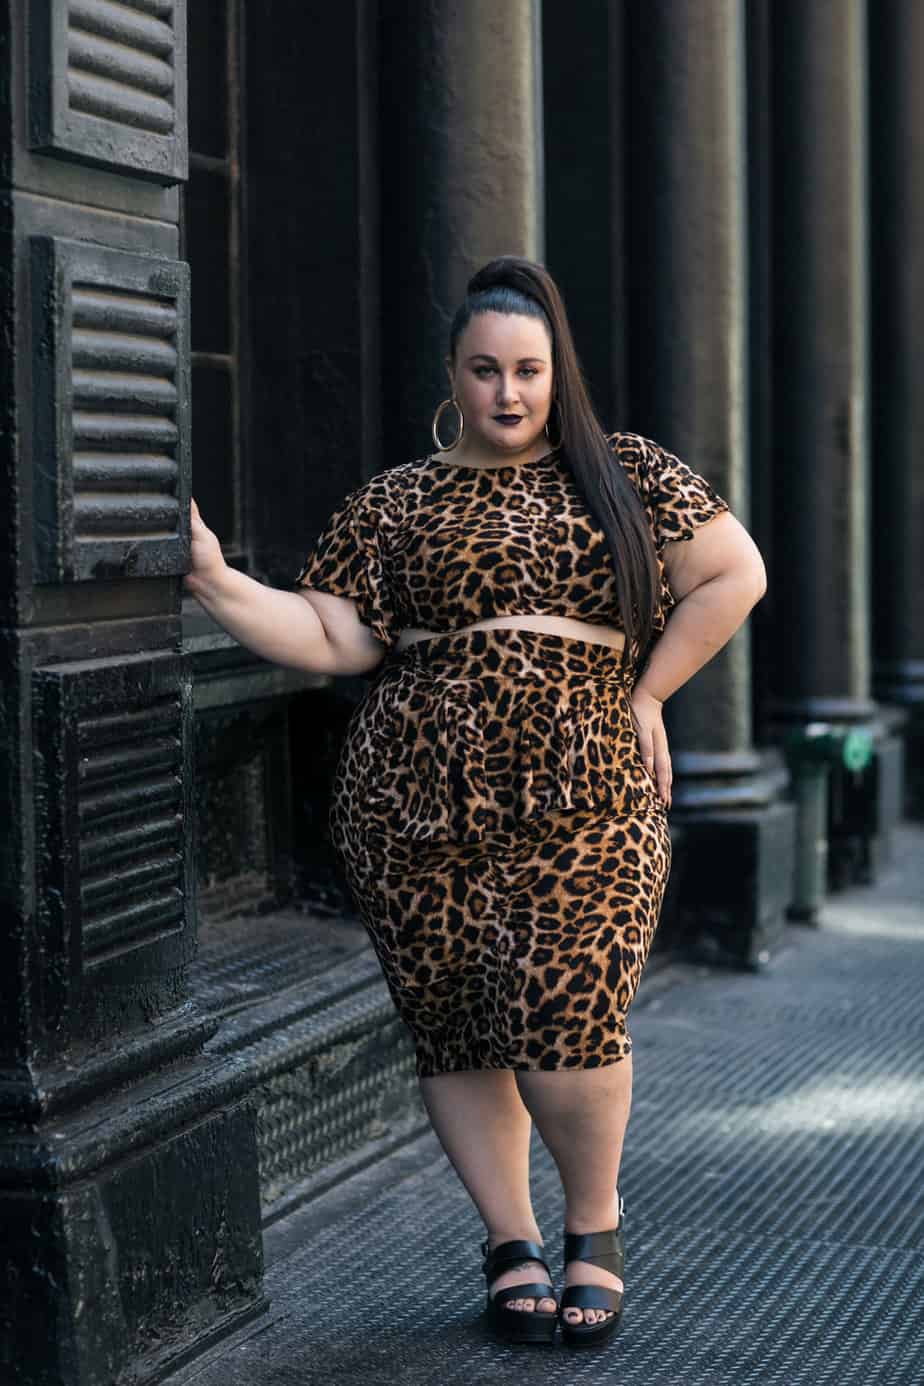 Designer Looks For Less — Plus Size Fashion Influencer & Consultant